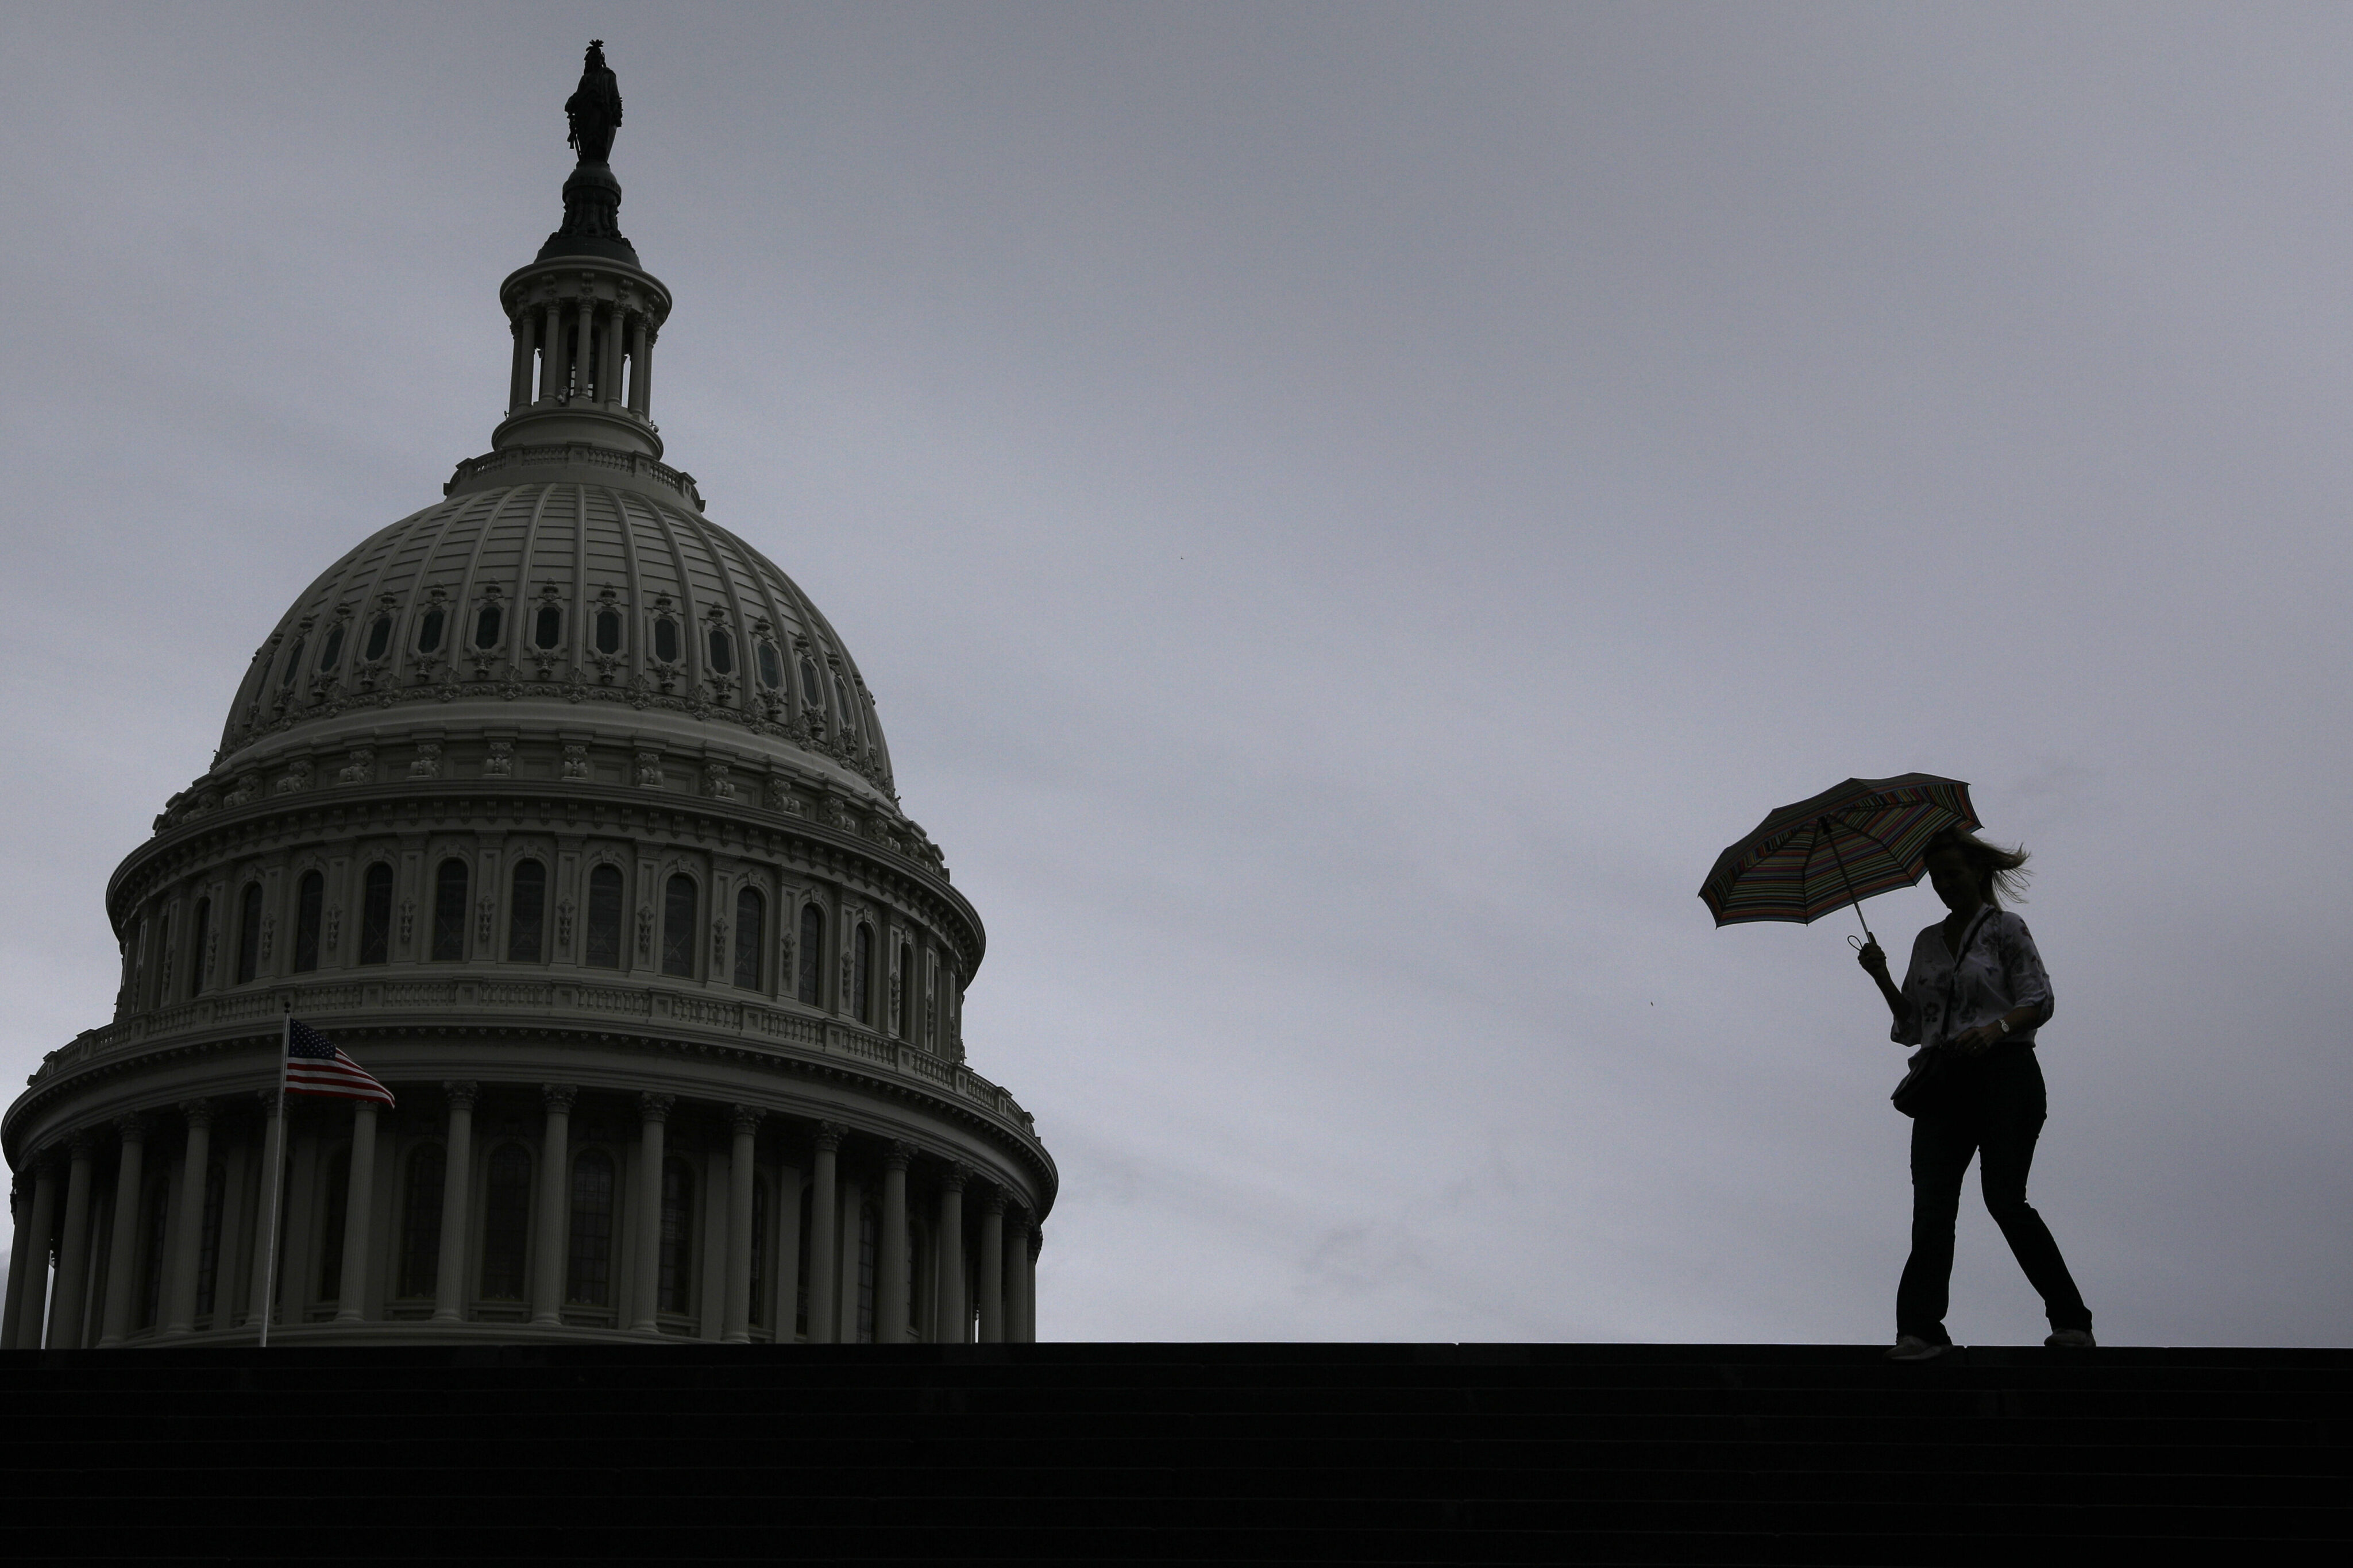 DC region forecast: Steady rain and a chance of afternoon thunderstorms